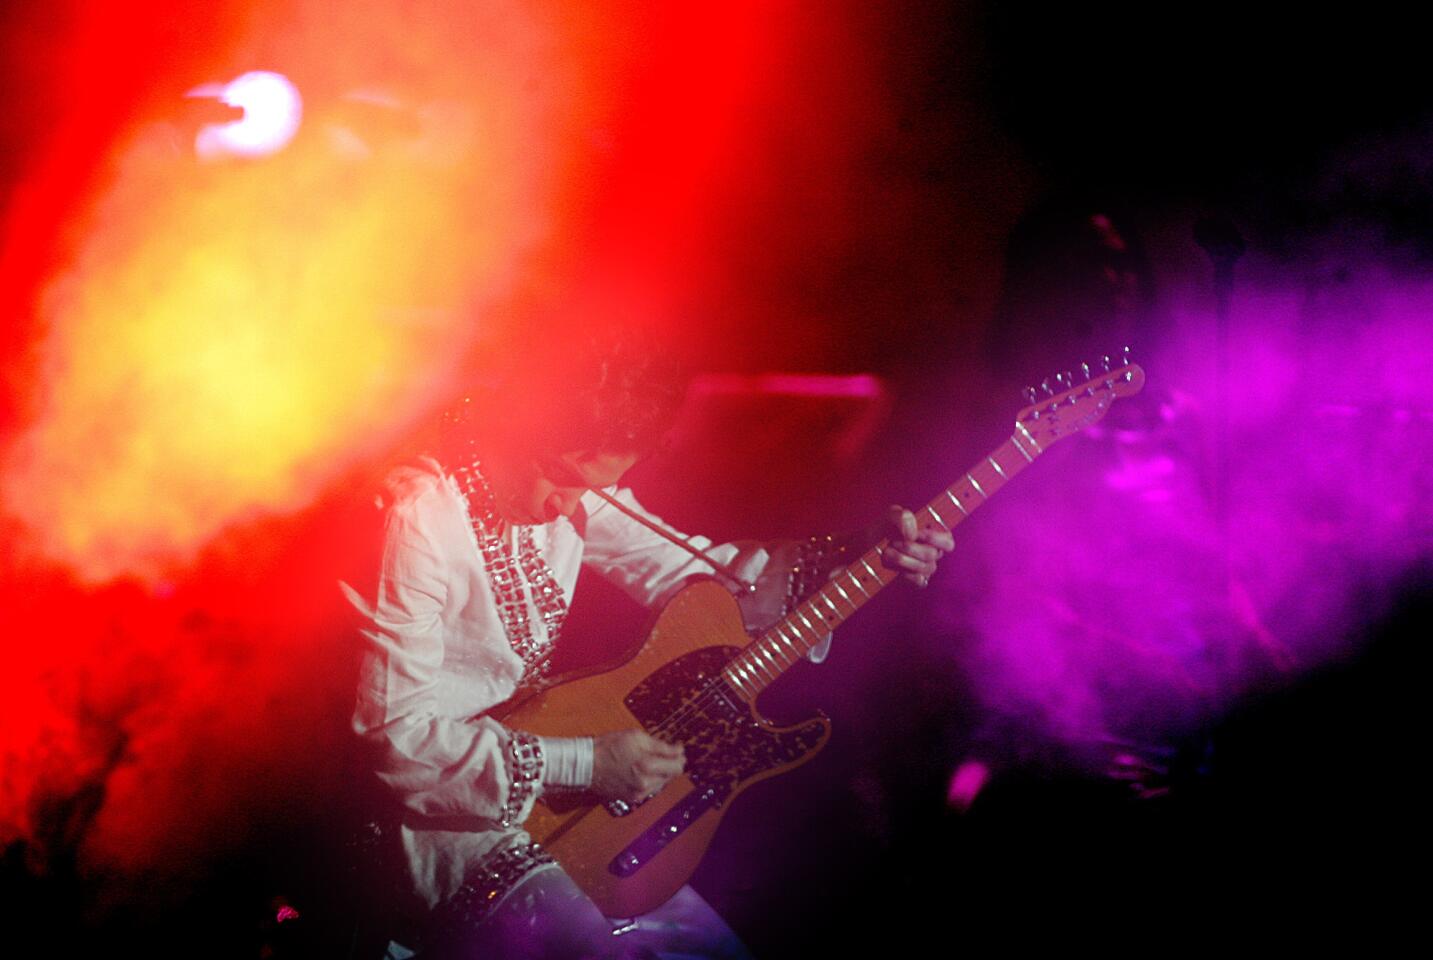 Prince performs at Coachella Valley Music & Arts Festival, 2009.